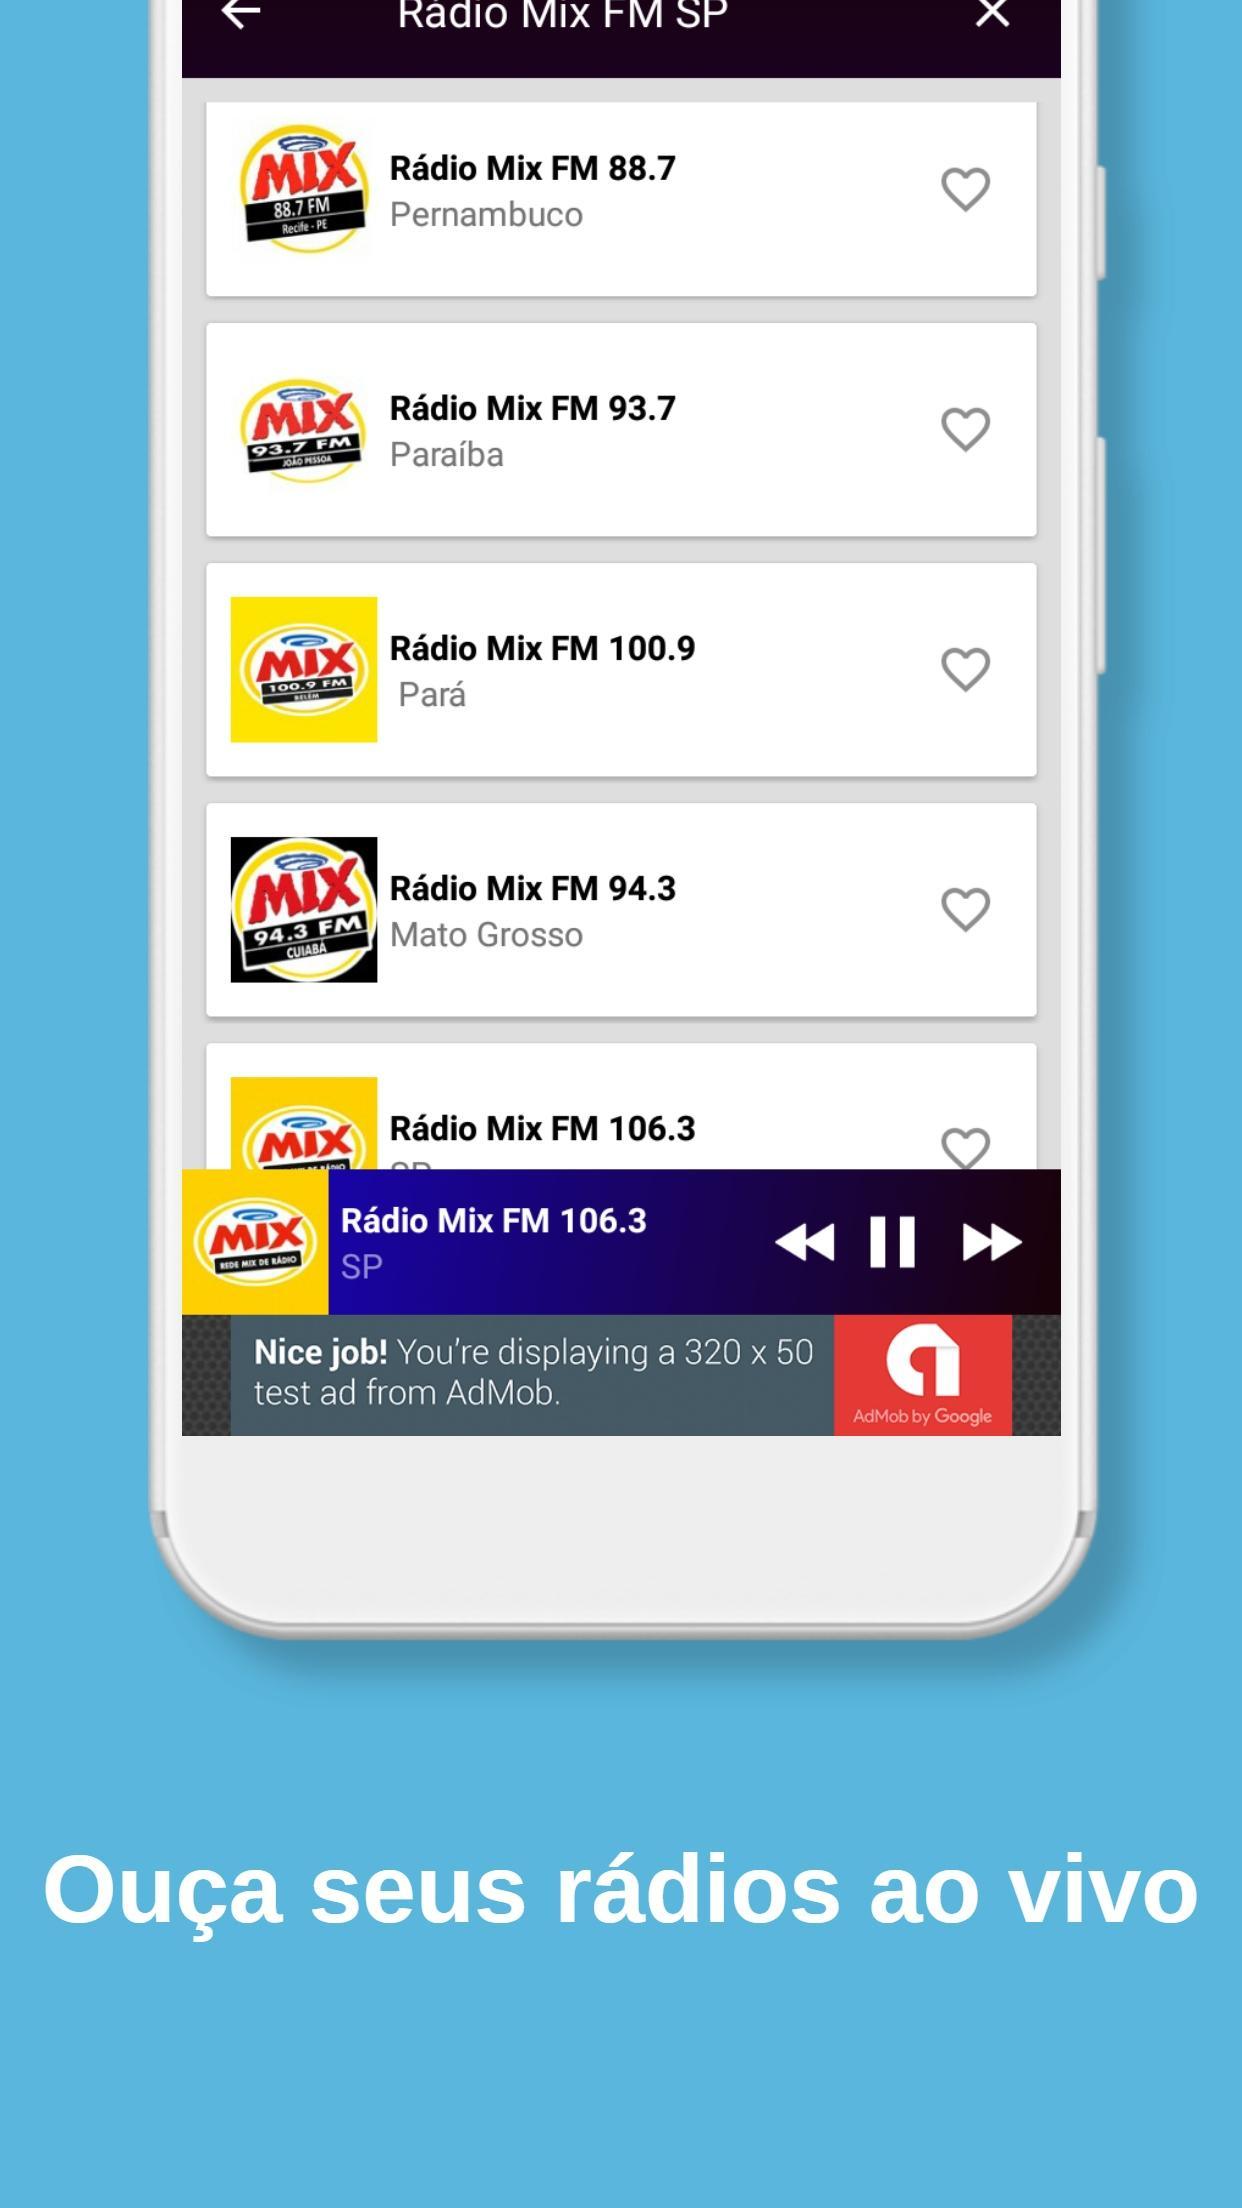 Radio Mix FM for Android - APK Download